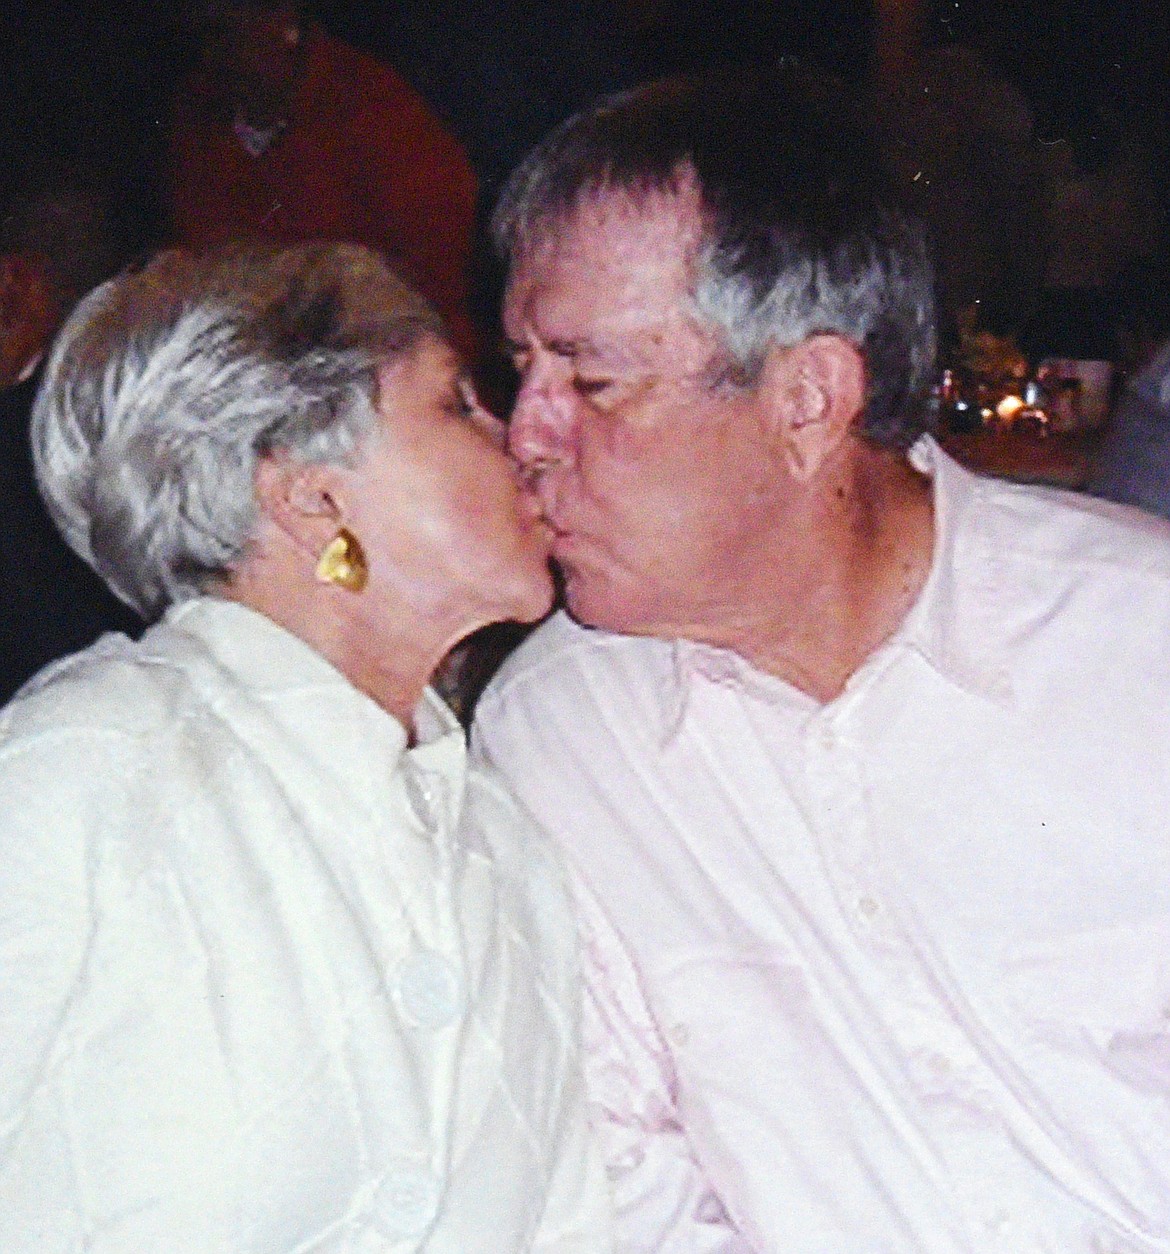 Whitefish residents Tim and Darlene Grattan were married for 60 years. Darlene passed away in December 2020 and Tim recently died Aug. 27, 2022. (Photo courtesy of Grattan family)